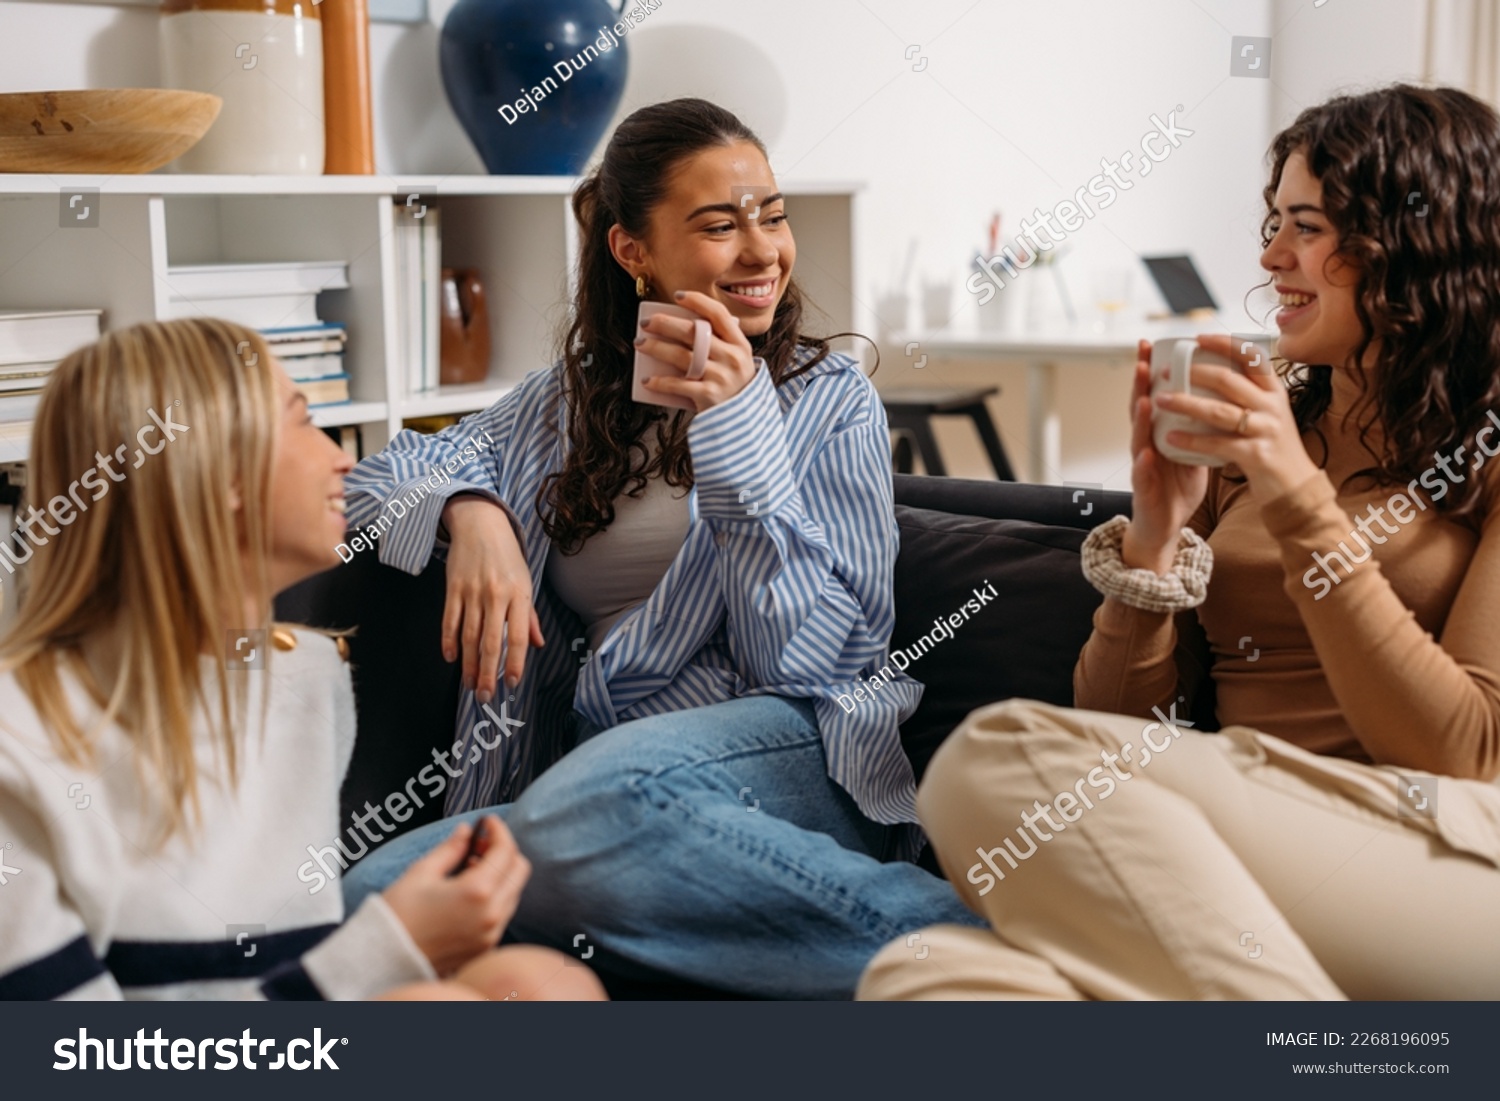 Three female friends are having an enjoyable conversation over coffee #2268196095